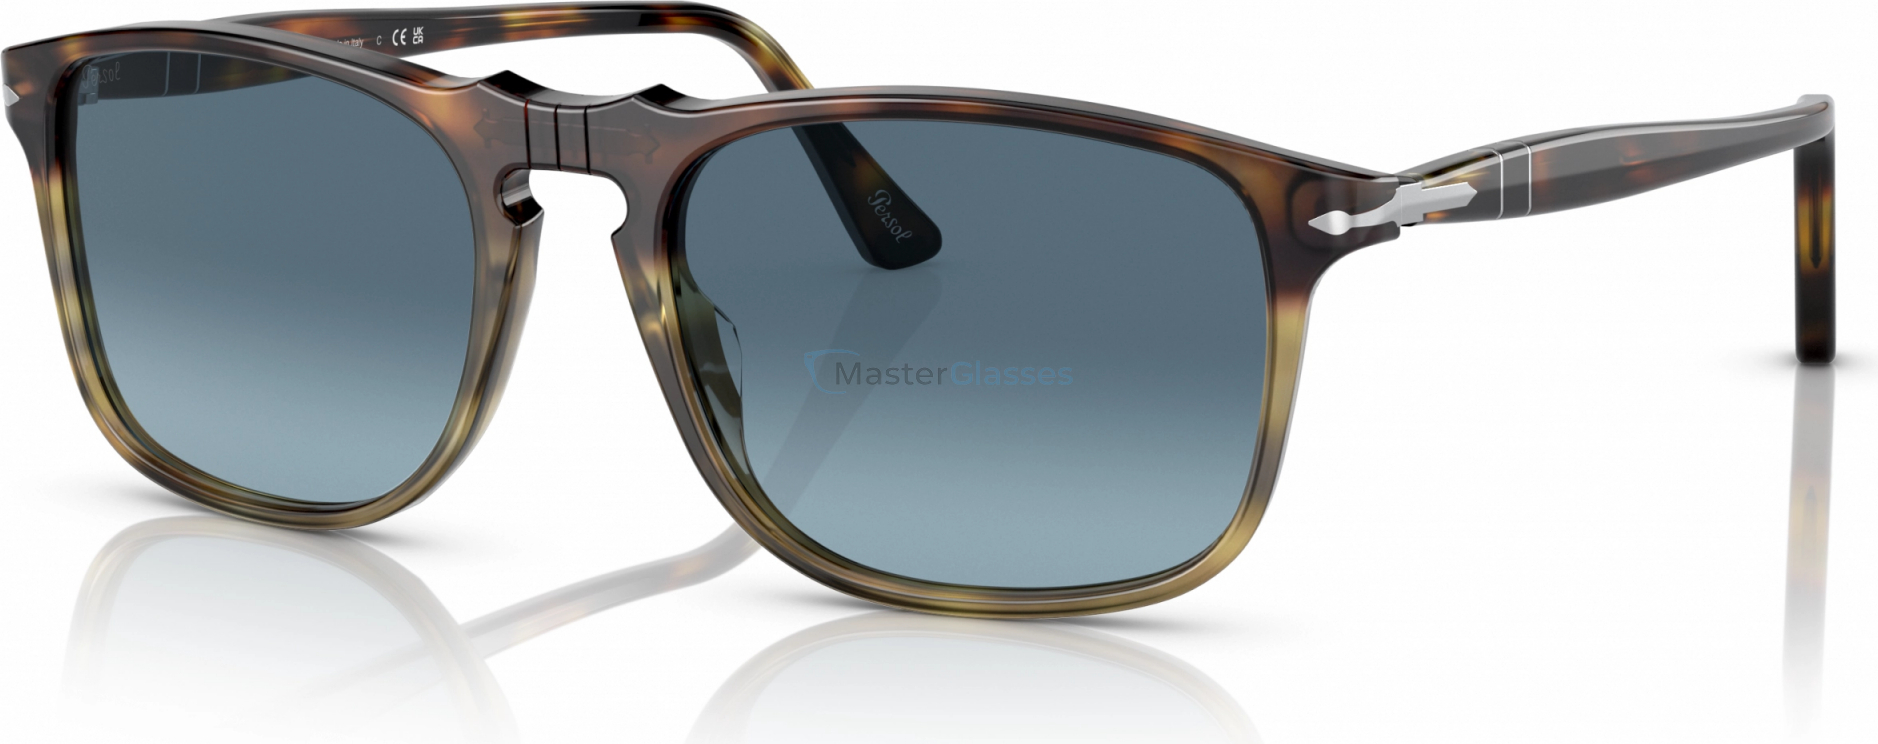   Persol PO3059S 1158Q8 Tortoise Spotted Brown